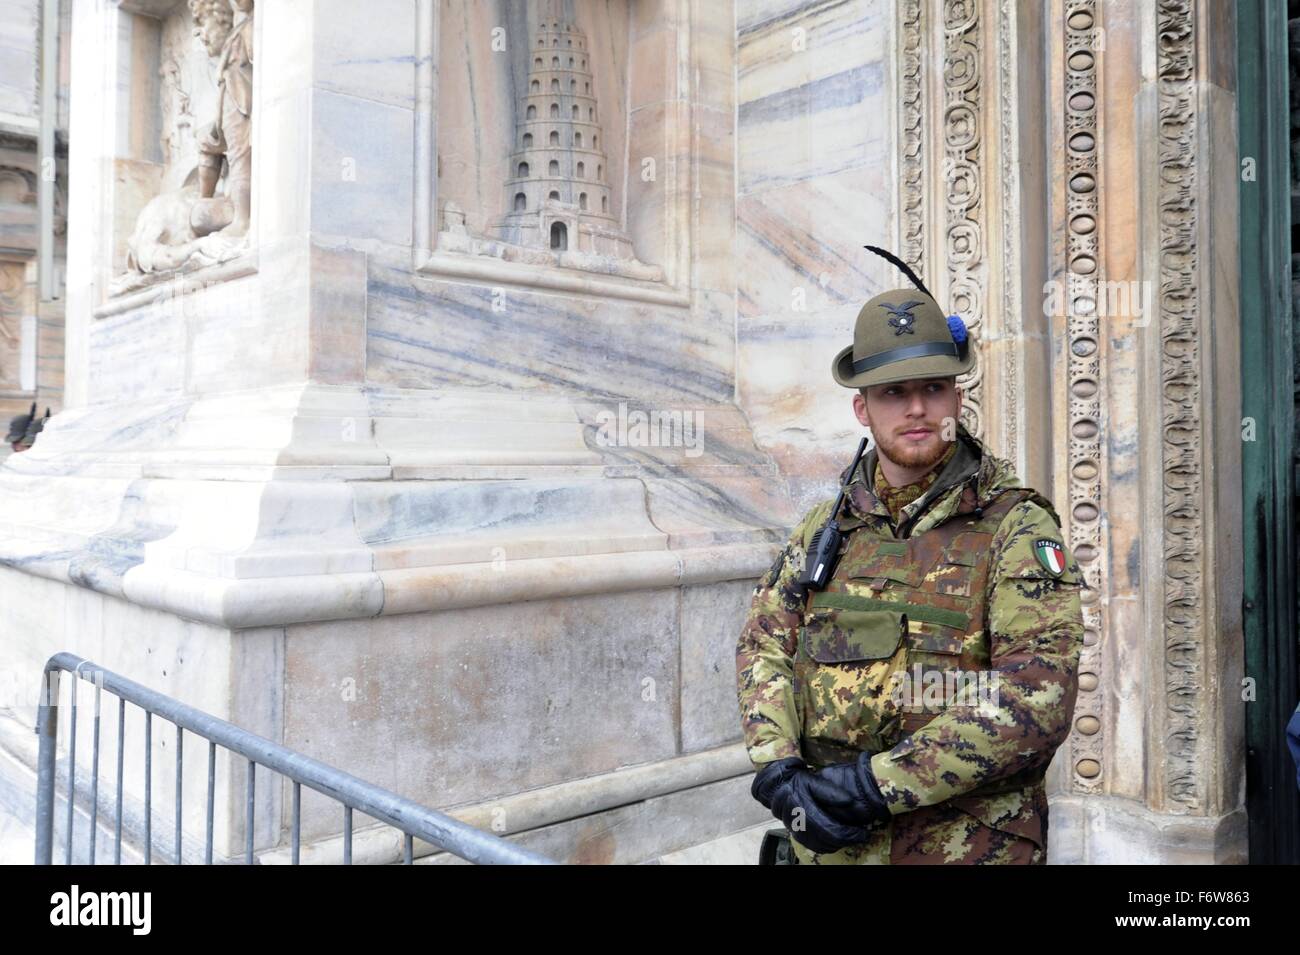 Milan, Italy. 19th November, 2015. The army in anti-terrorism security service around the Cathedral Duomo Credit:  Dino Fracchia/Alamy Live News Stock Photo